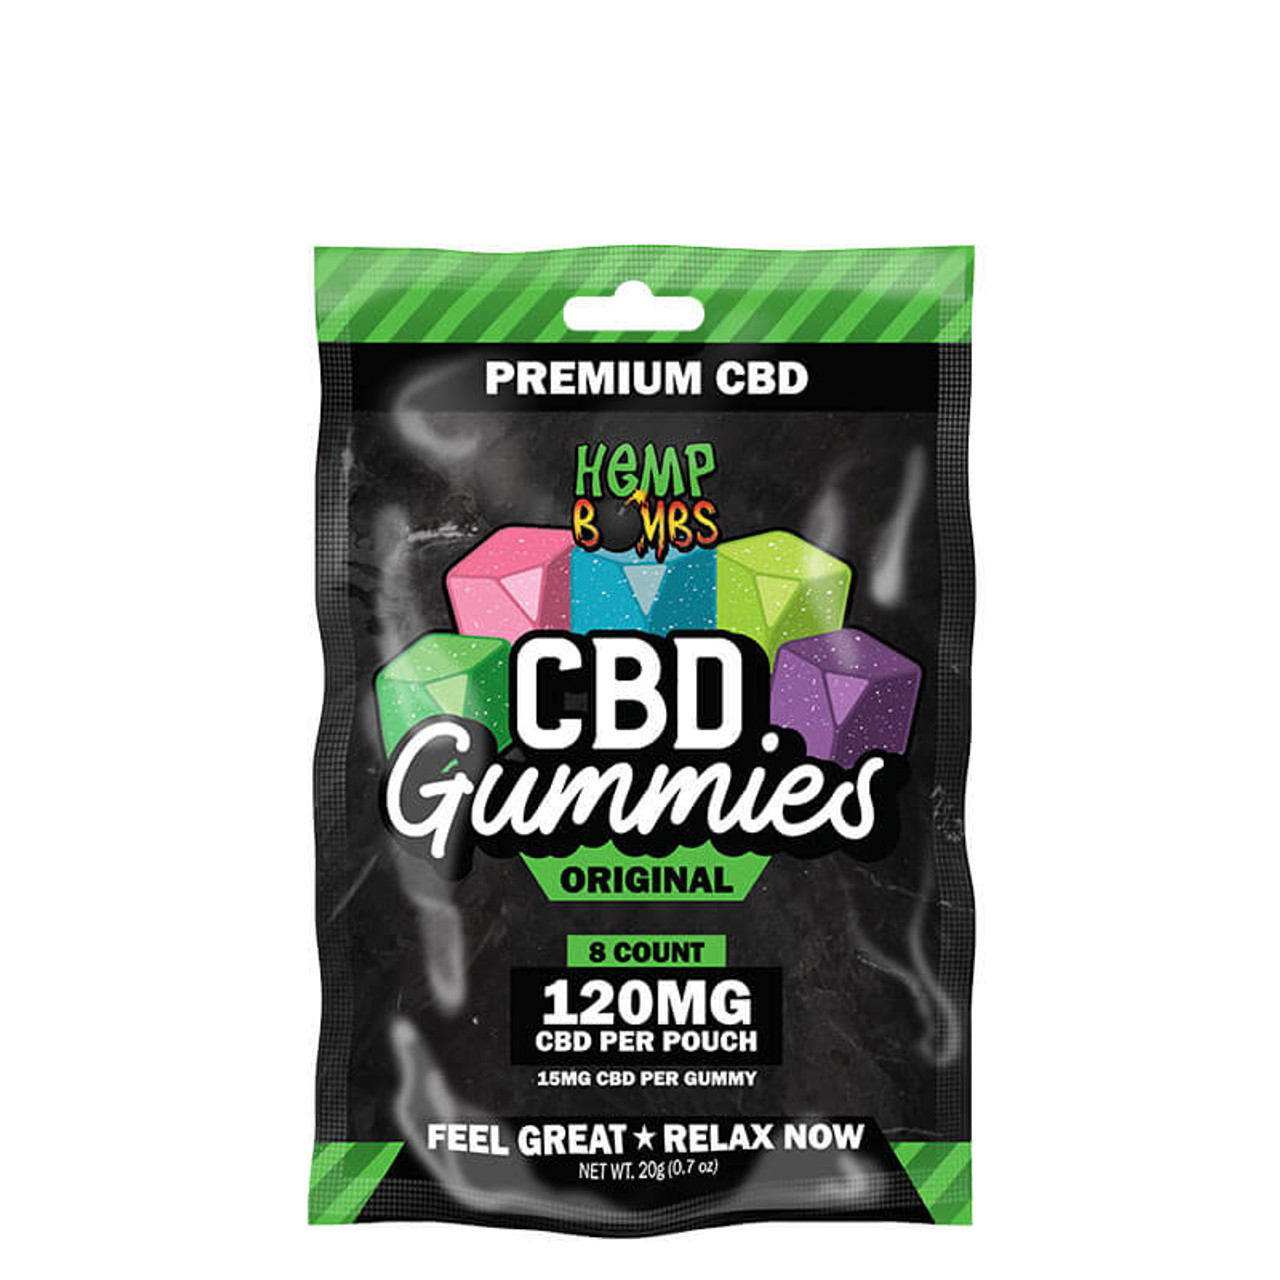 The Advantages of Delta 8 THC Gummies for Pain Management and Anxiety Relief